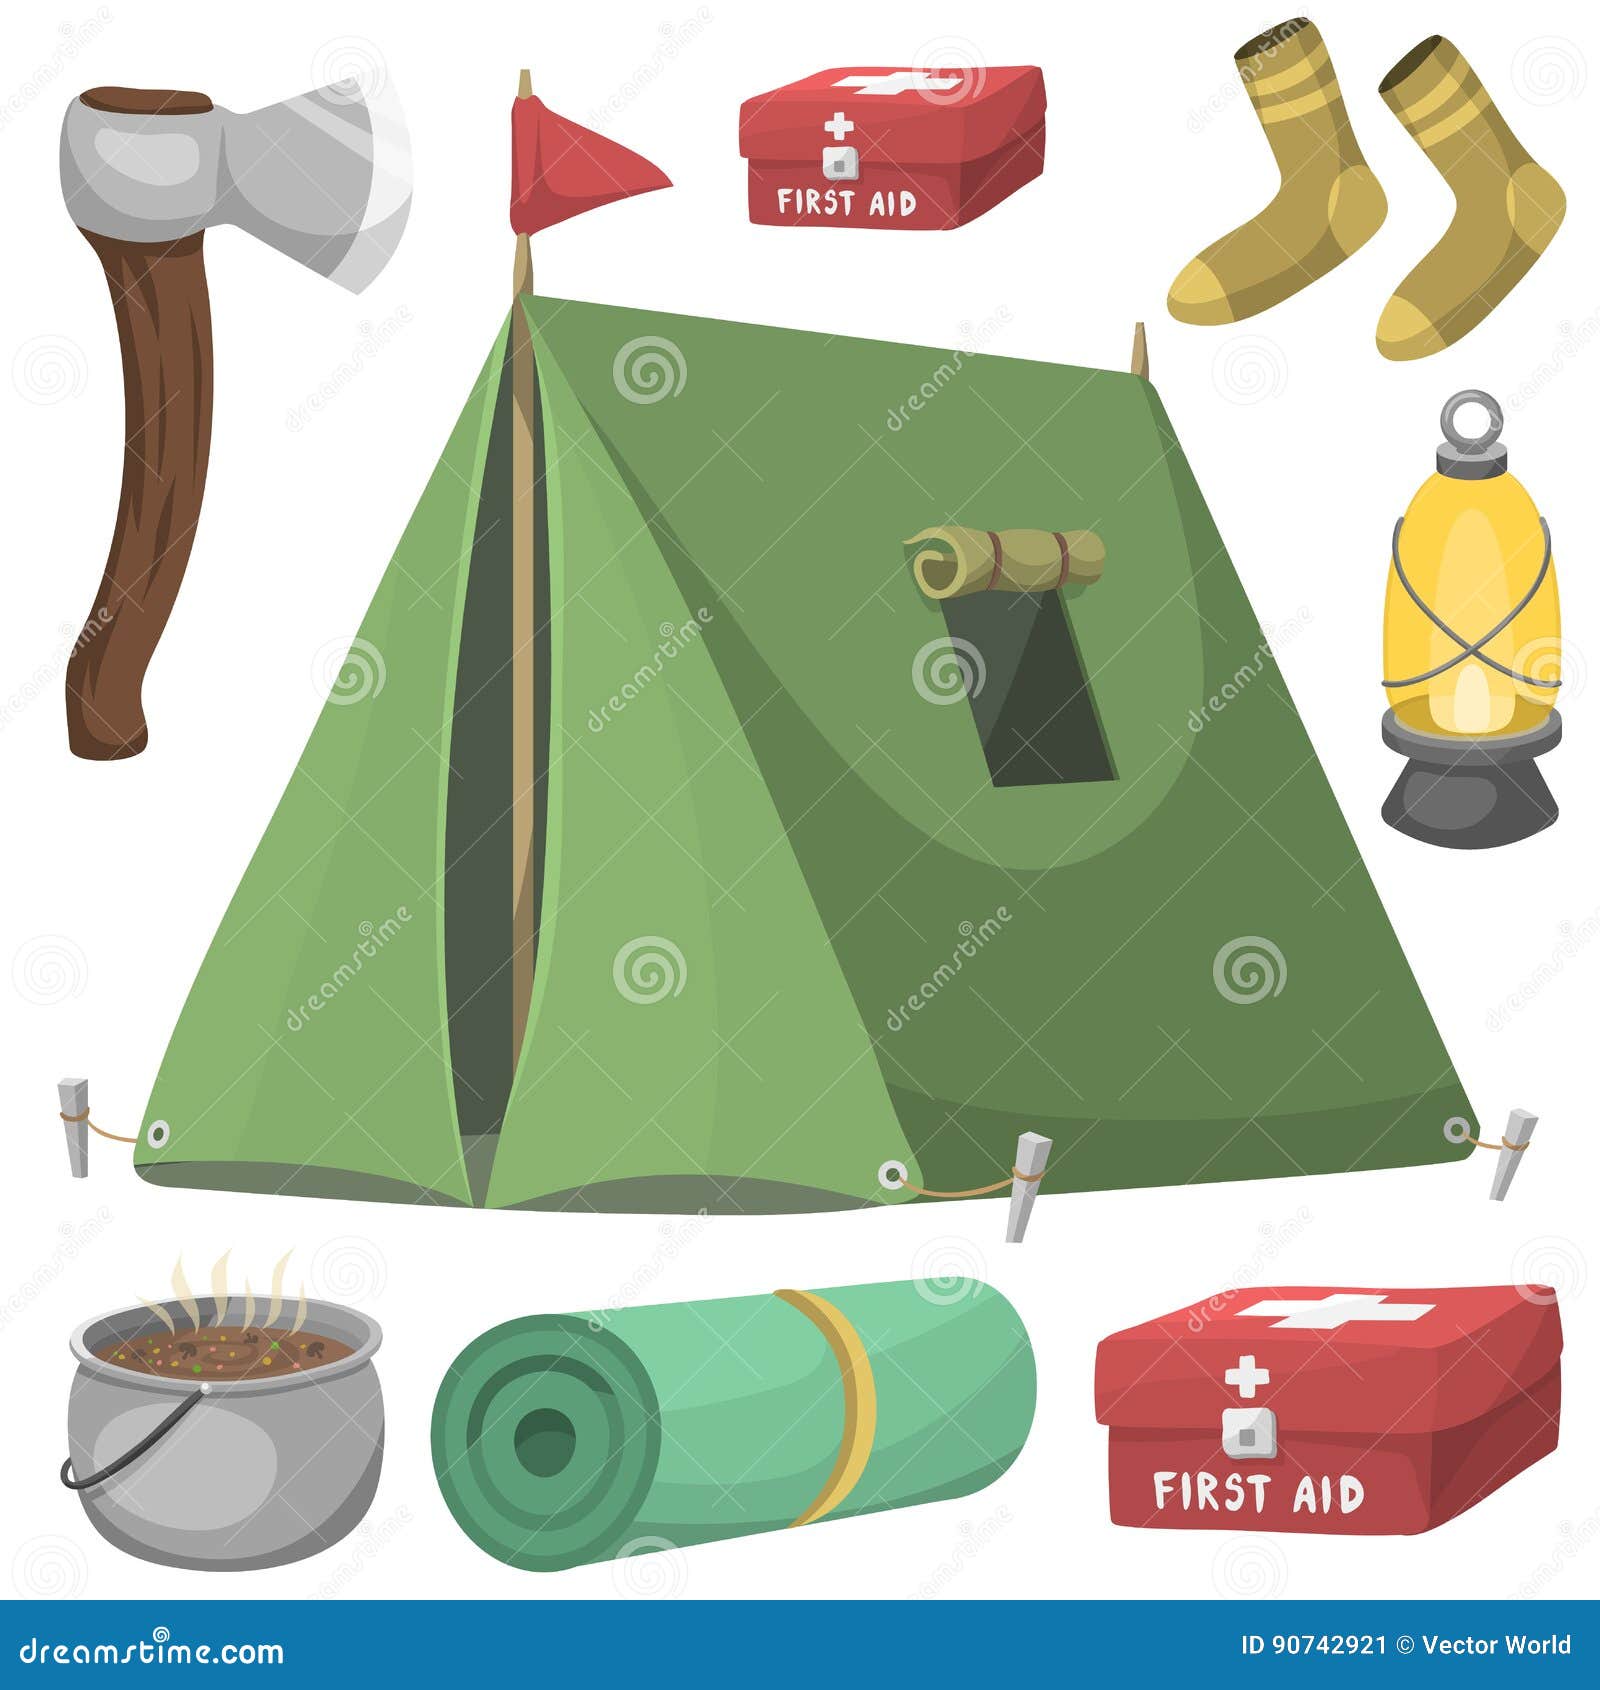 Camping Hiking Gear And Supplies Graphics Set Stock Illustration